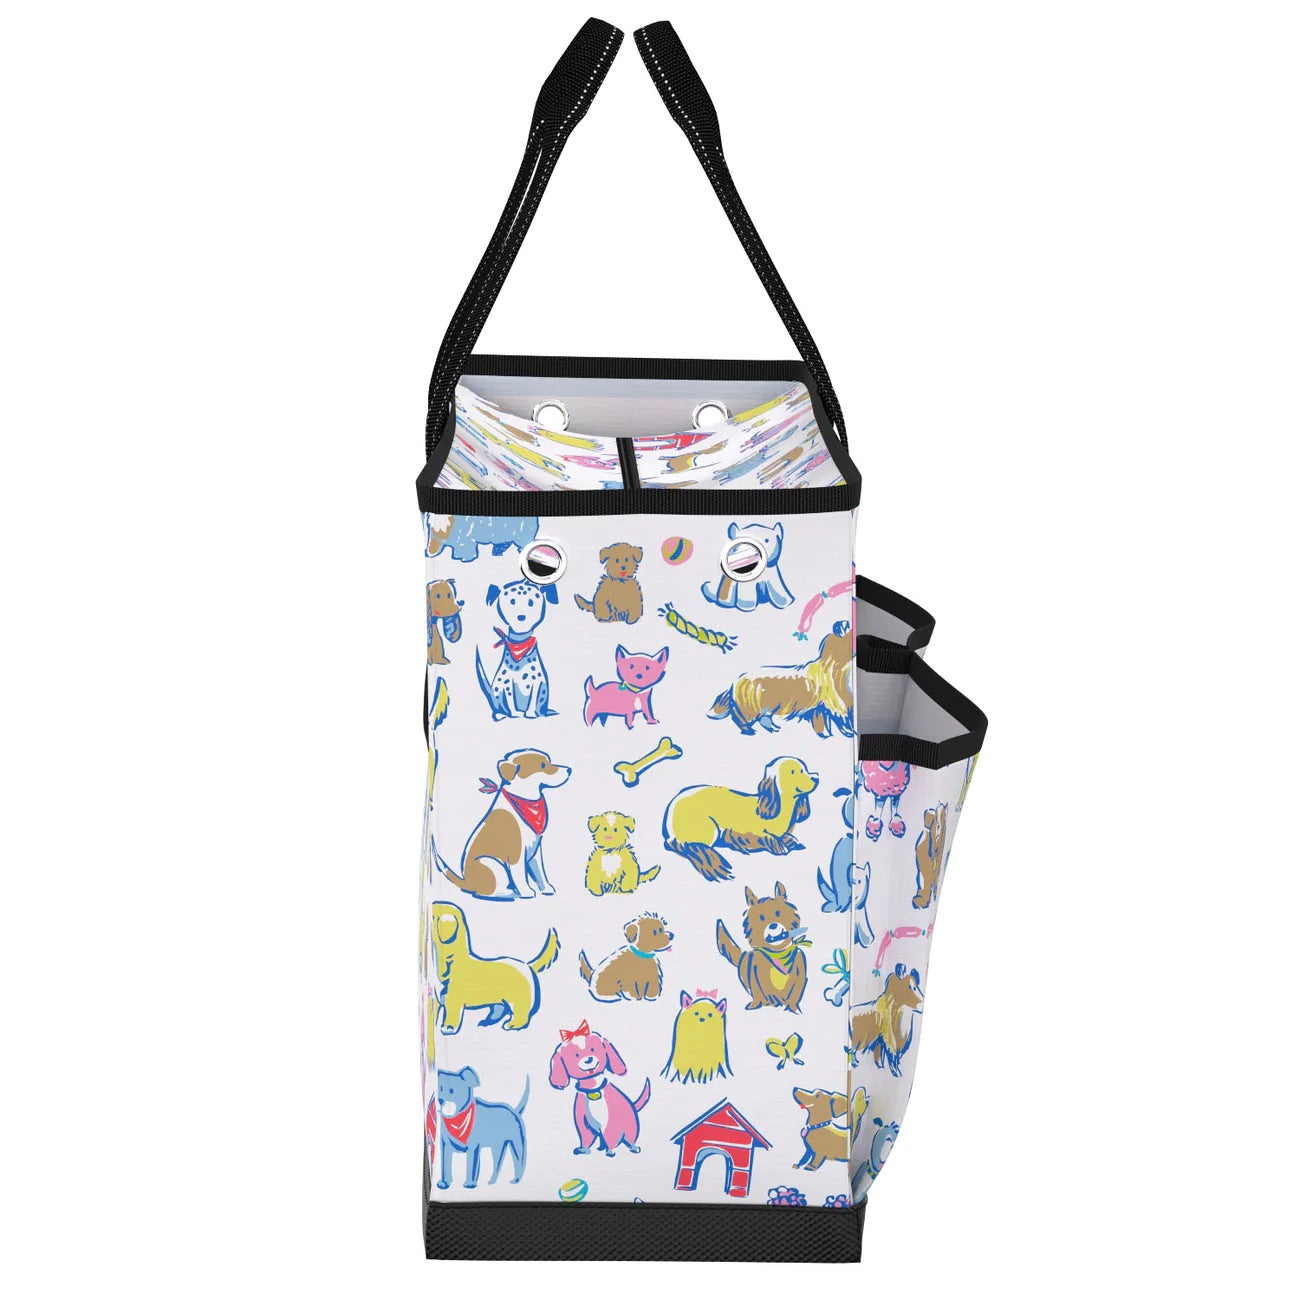 THE BJ BAG POCKET TOTE "Best in Show" Print